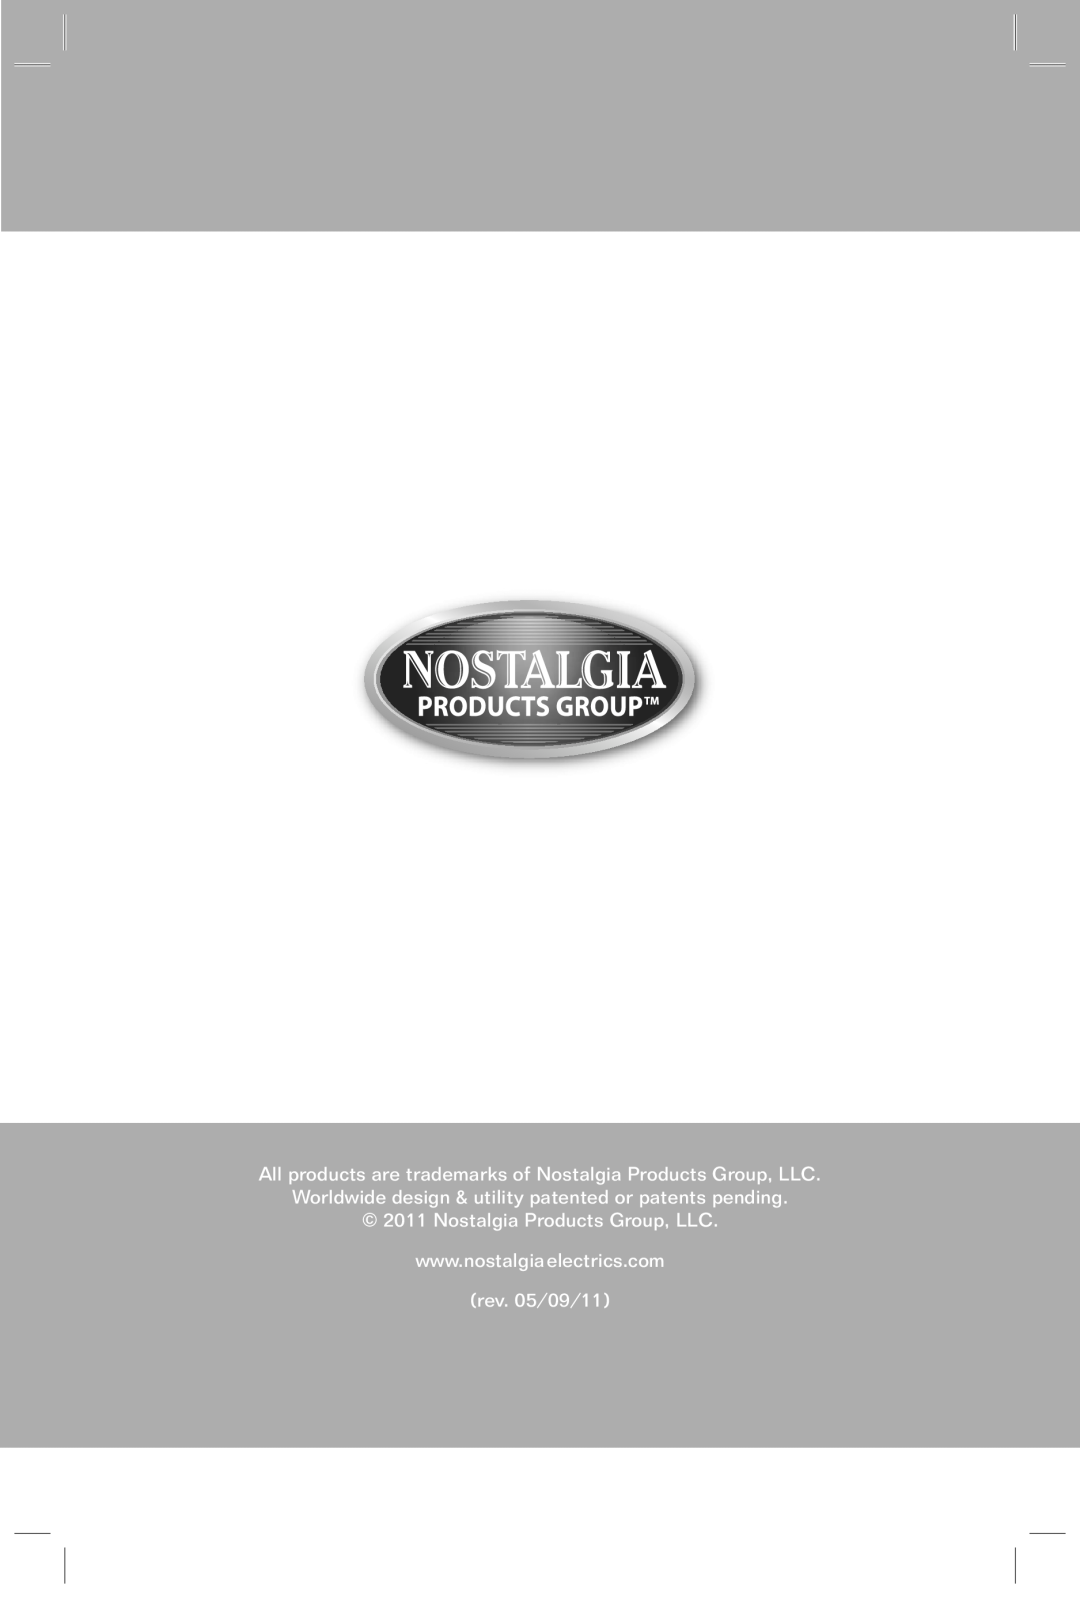 Nostalgia Electrics HKP200 manual All products are trademarks of Nostalgia Products Group, LLC, rev. 05/09/11 